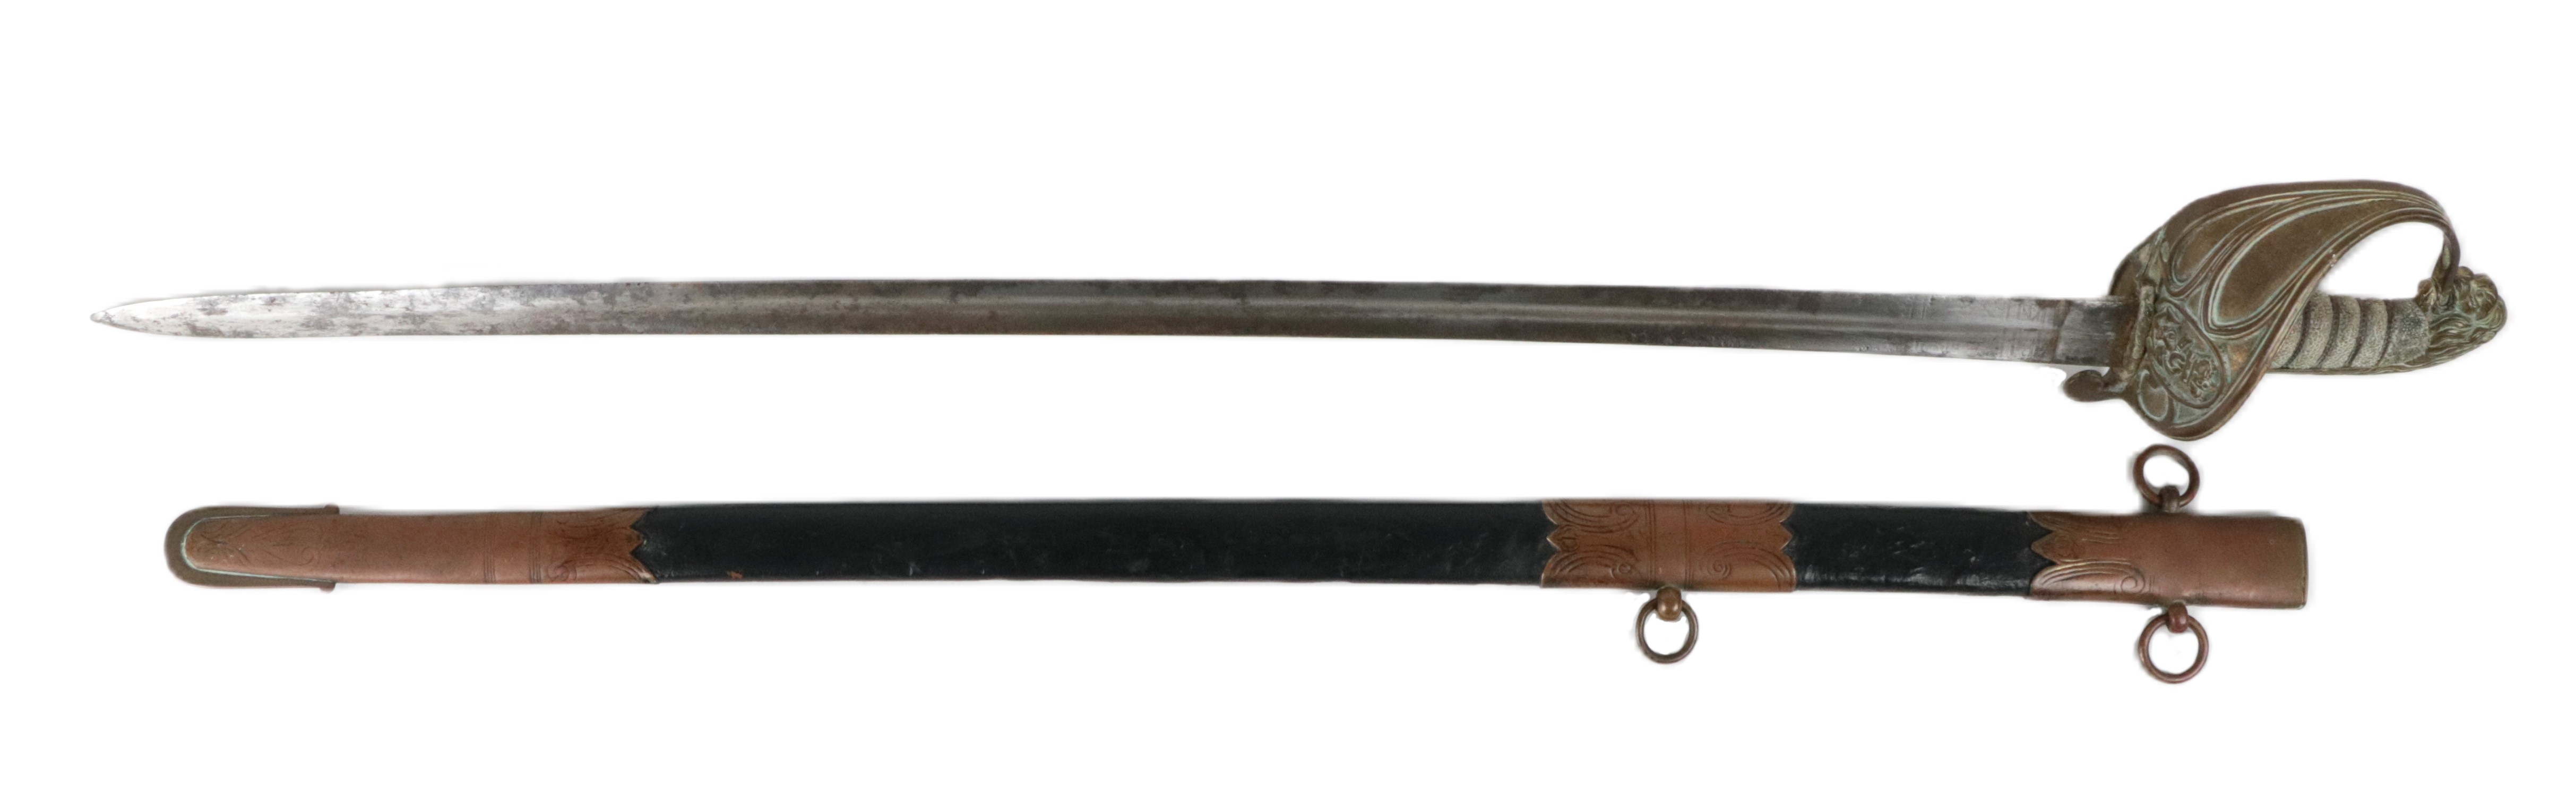 Militaria: A late 19th Century Naval Sword, probably by James Cracknell, Portsea (makers marks worn) - Image 2 of 4